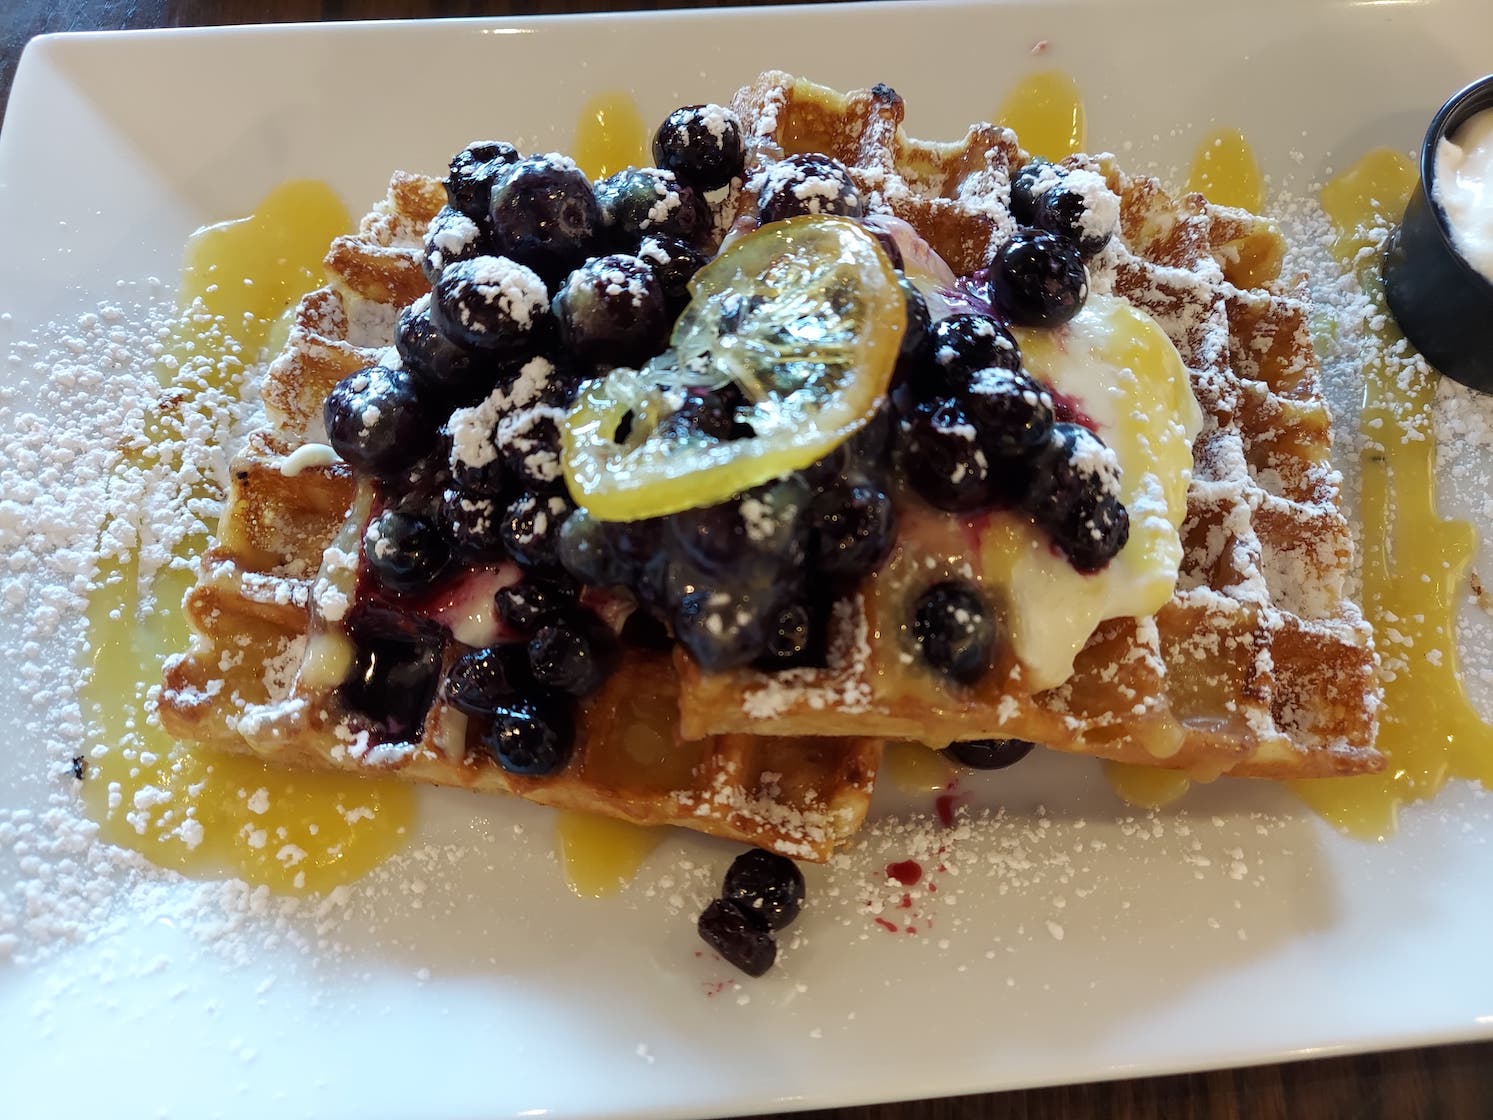 Lemon Curd and Blueberry Compote Waffles at Cafe Luna